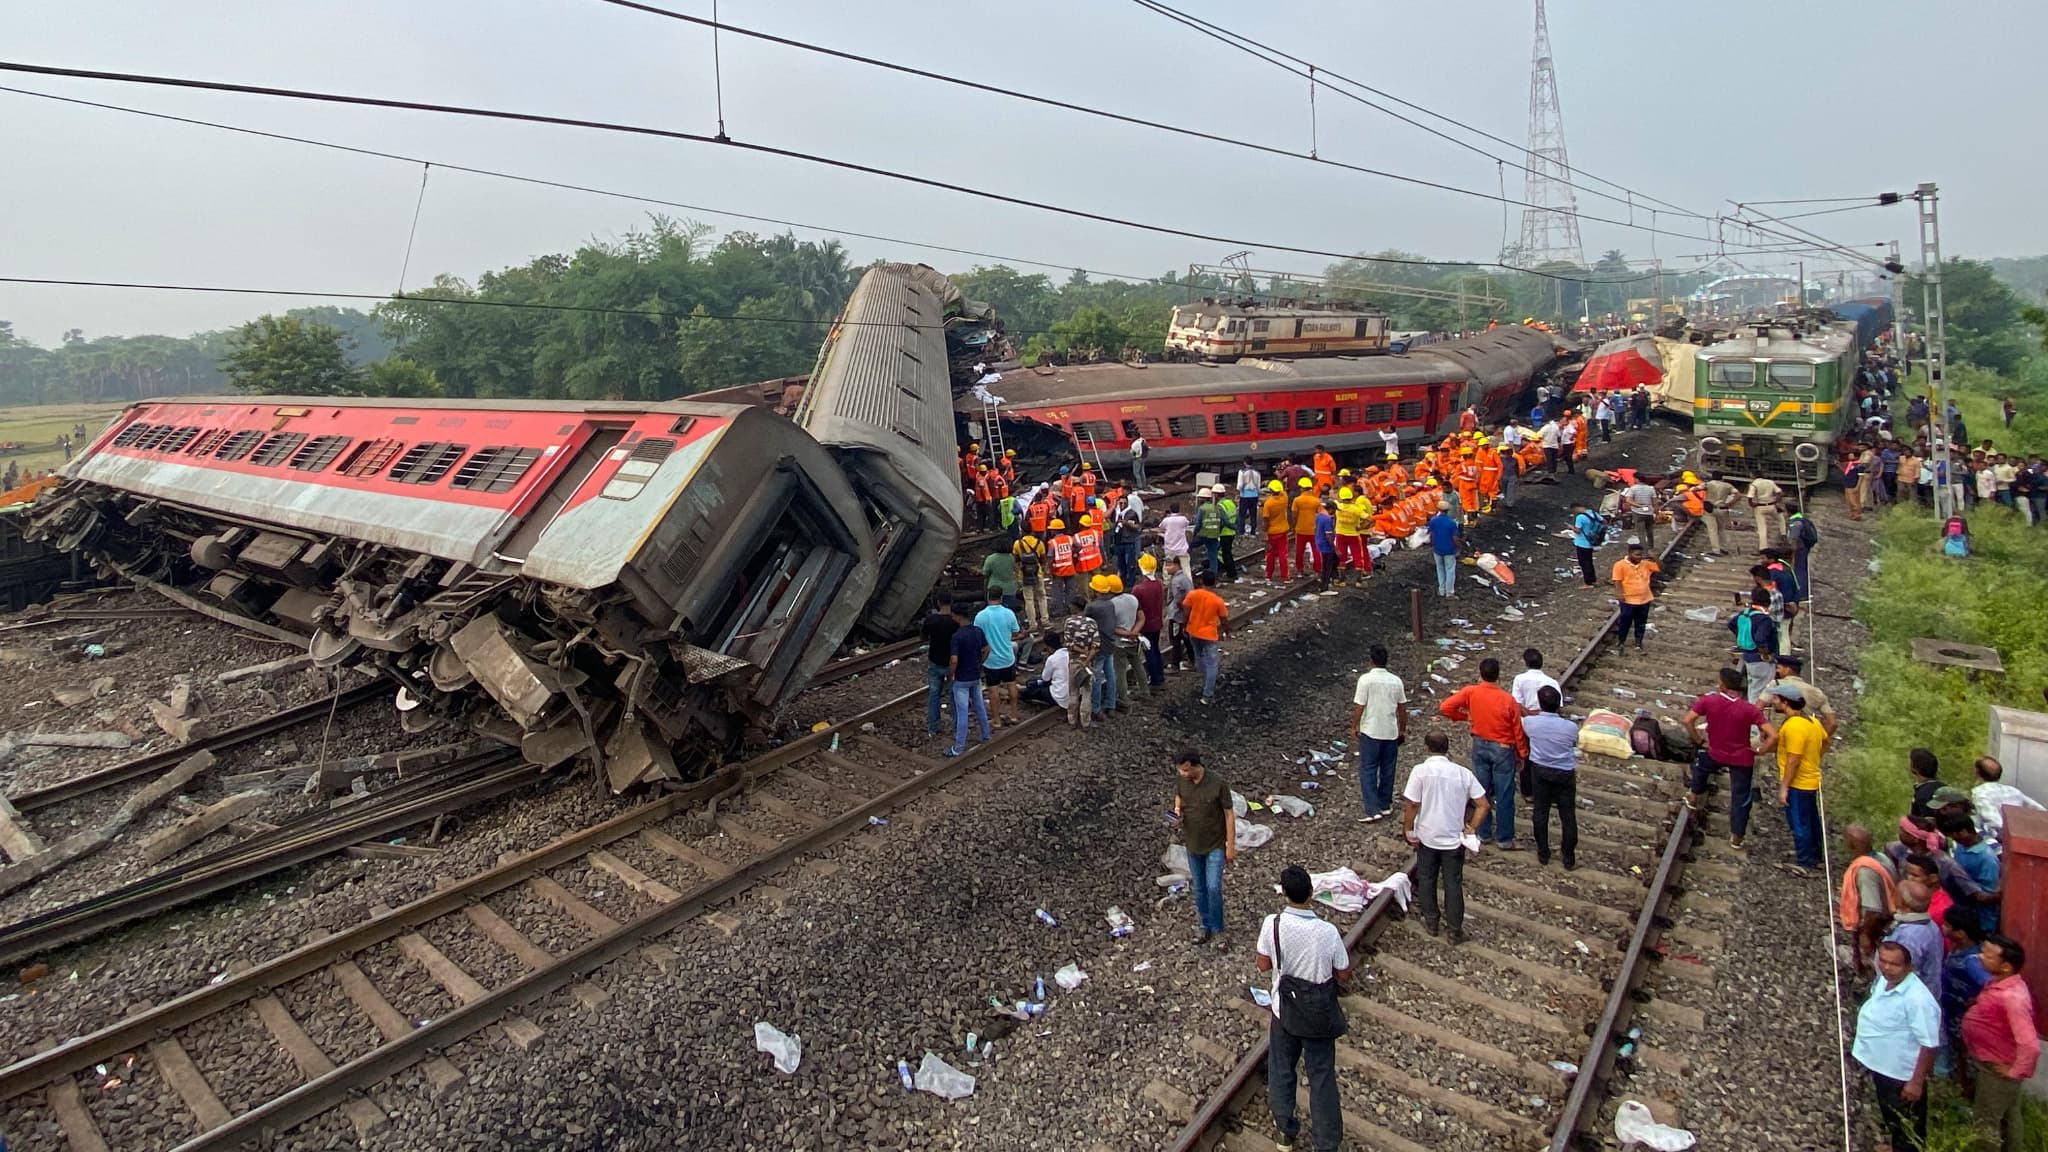 The train disaster left at least 288 people dead and more than 850 injured.